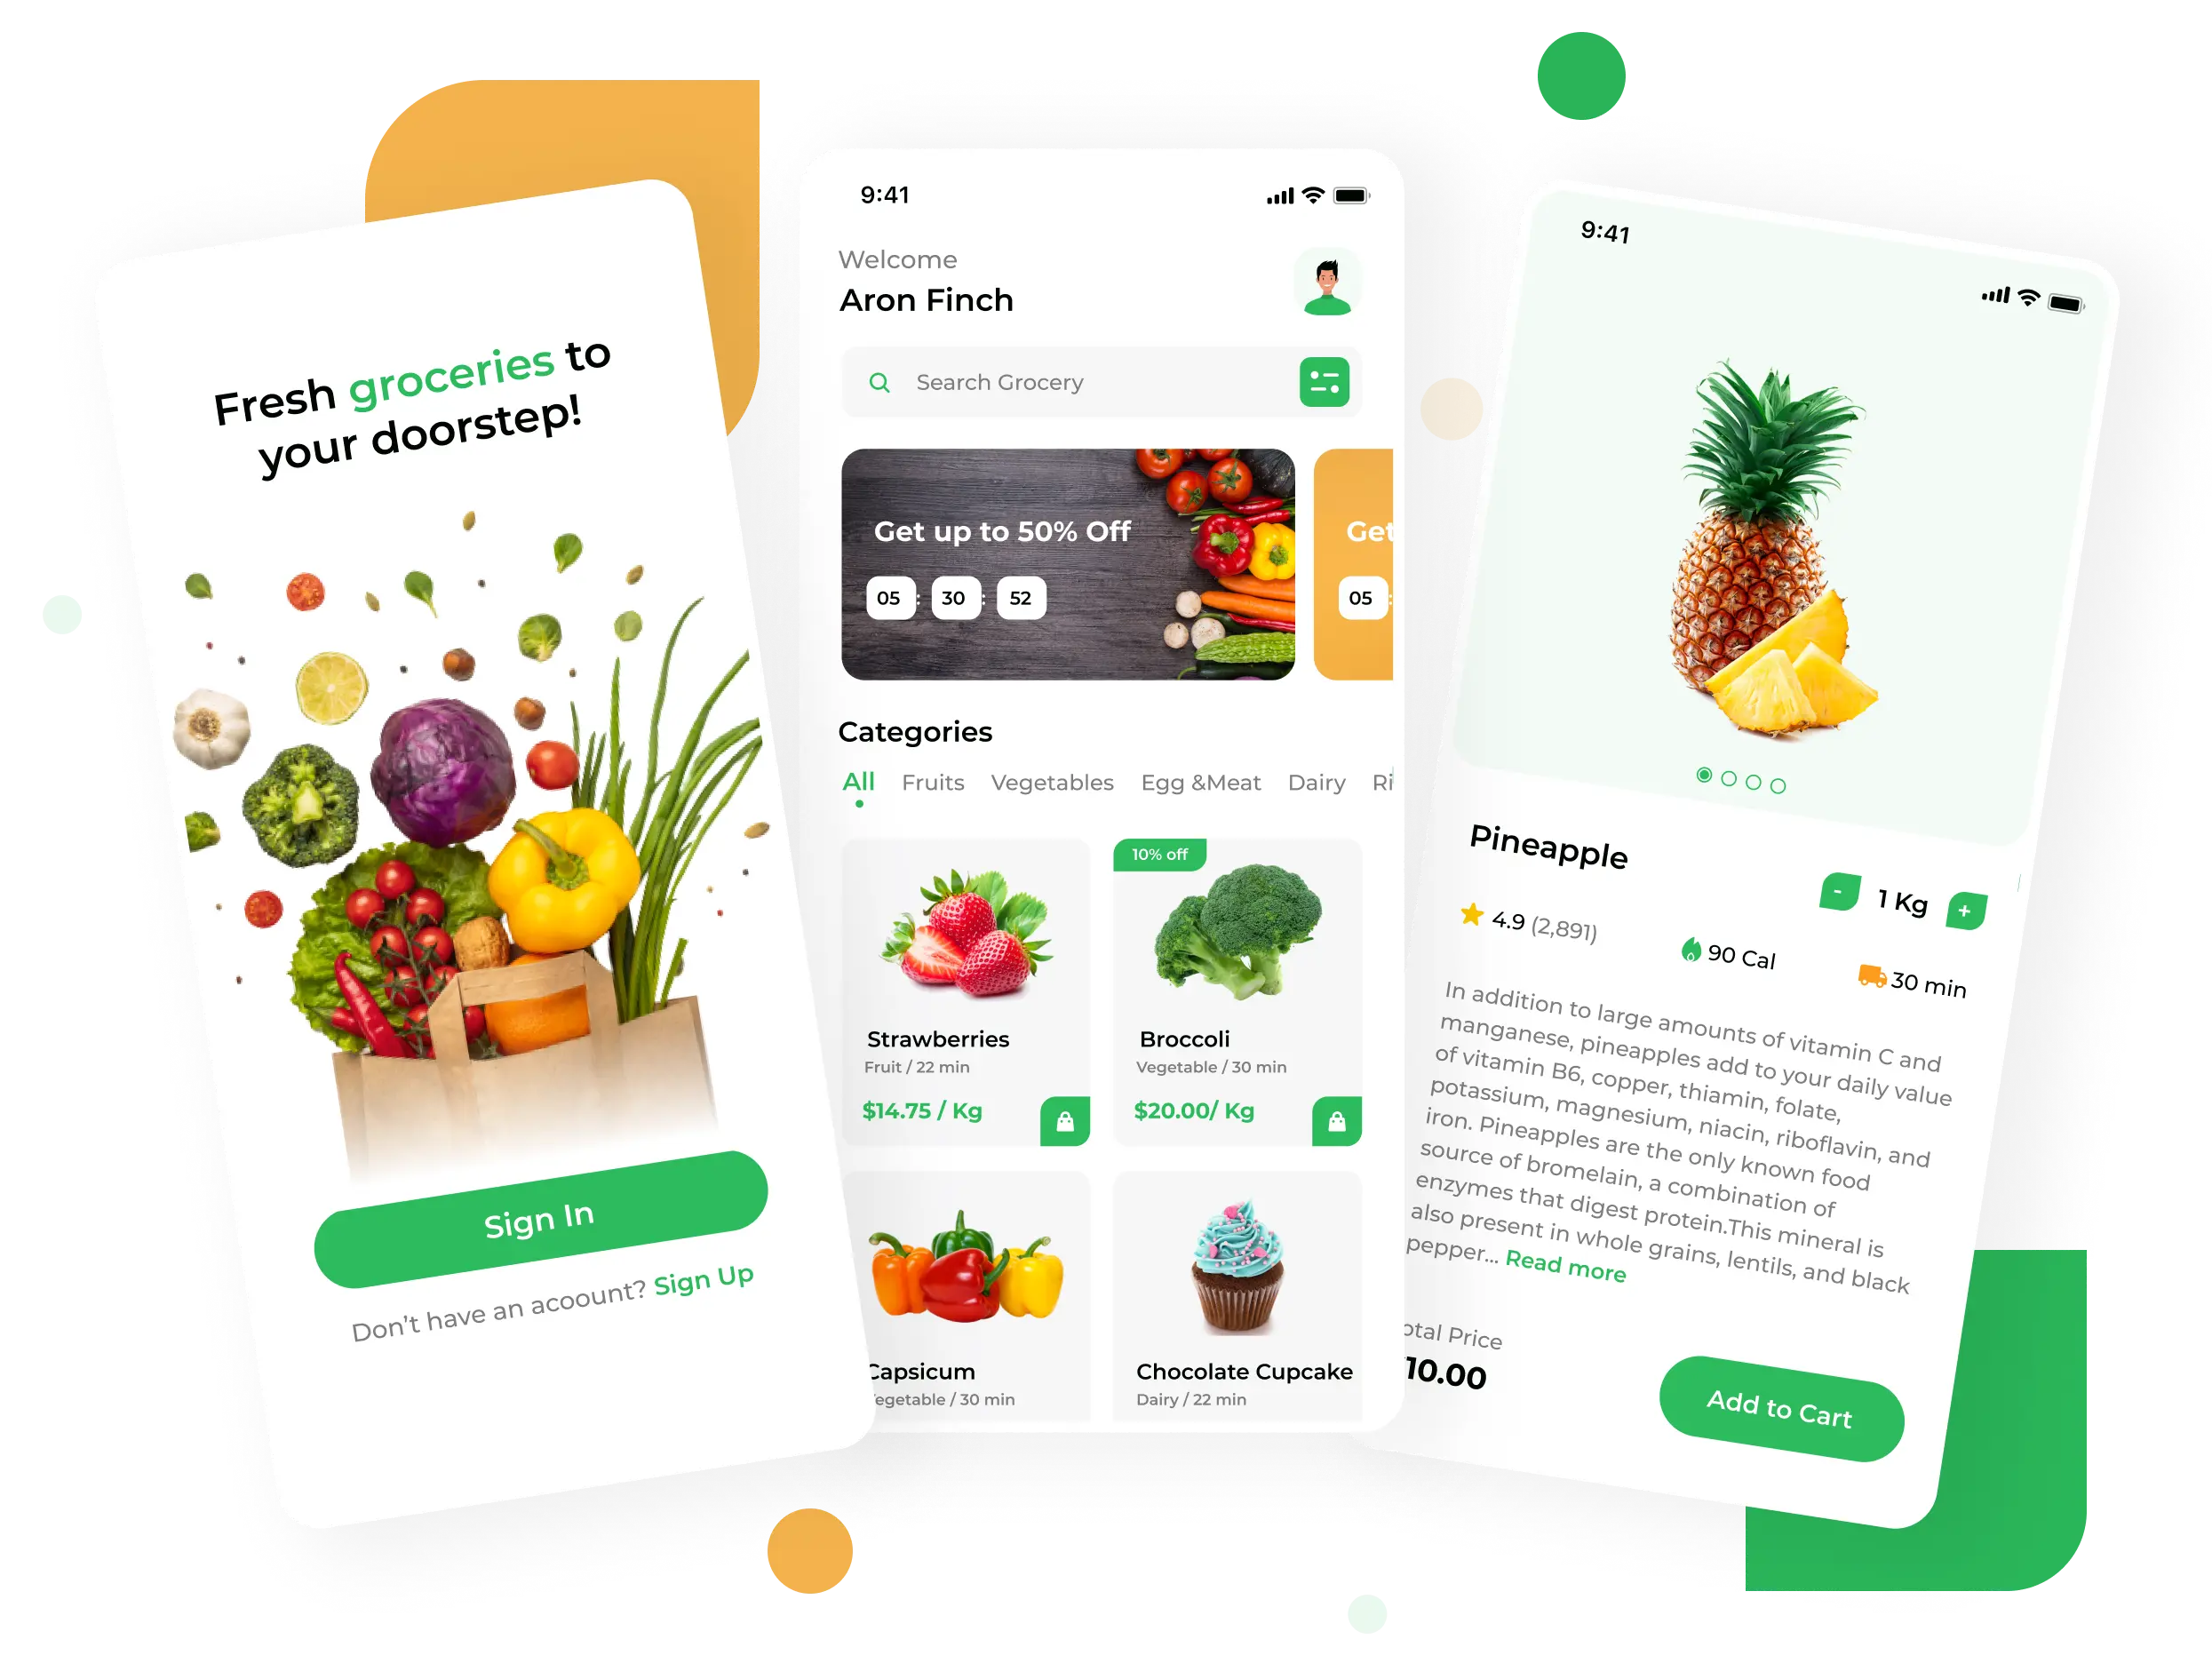 Fresh and Colorful Grocery Products are Displayed in the Store. A Developed App for finding Groceries easily.